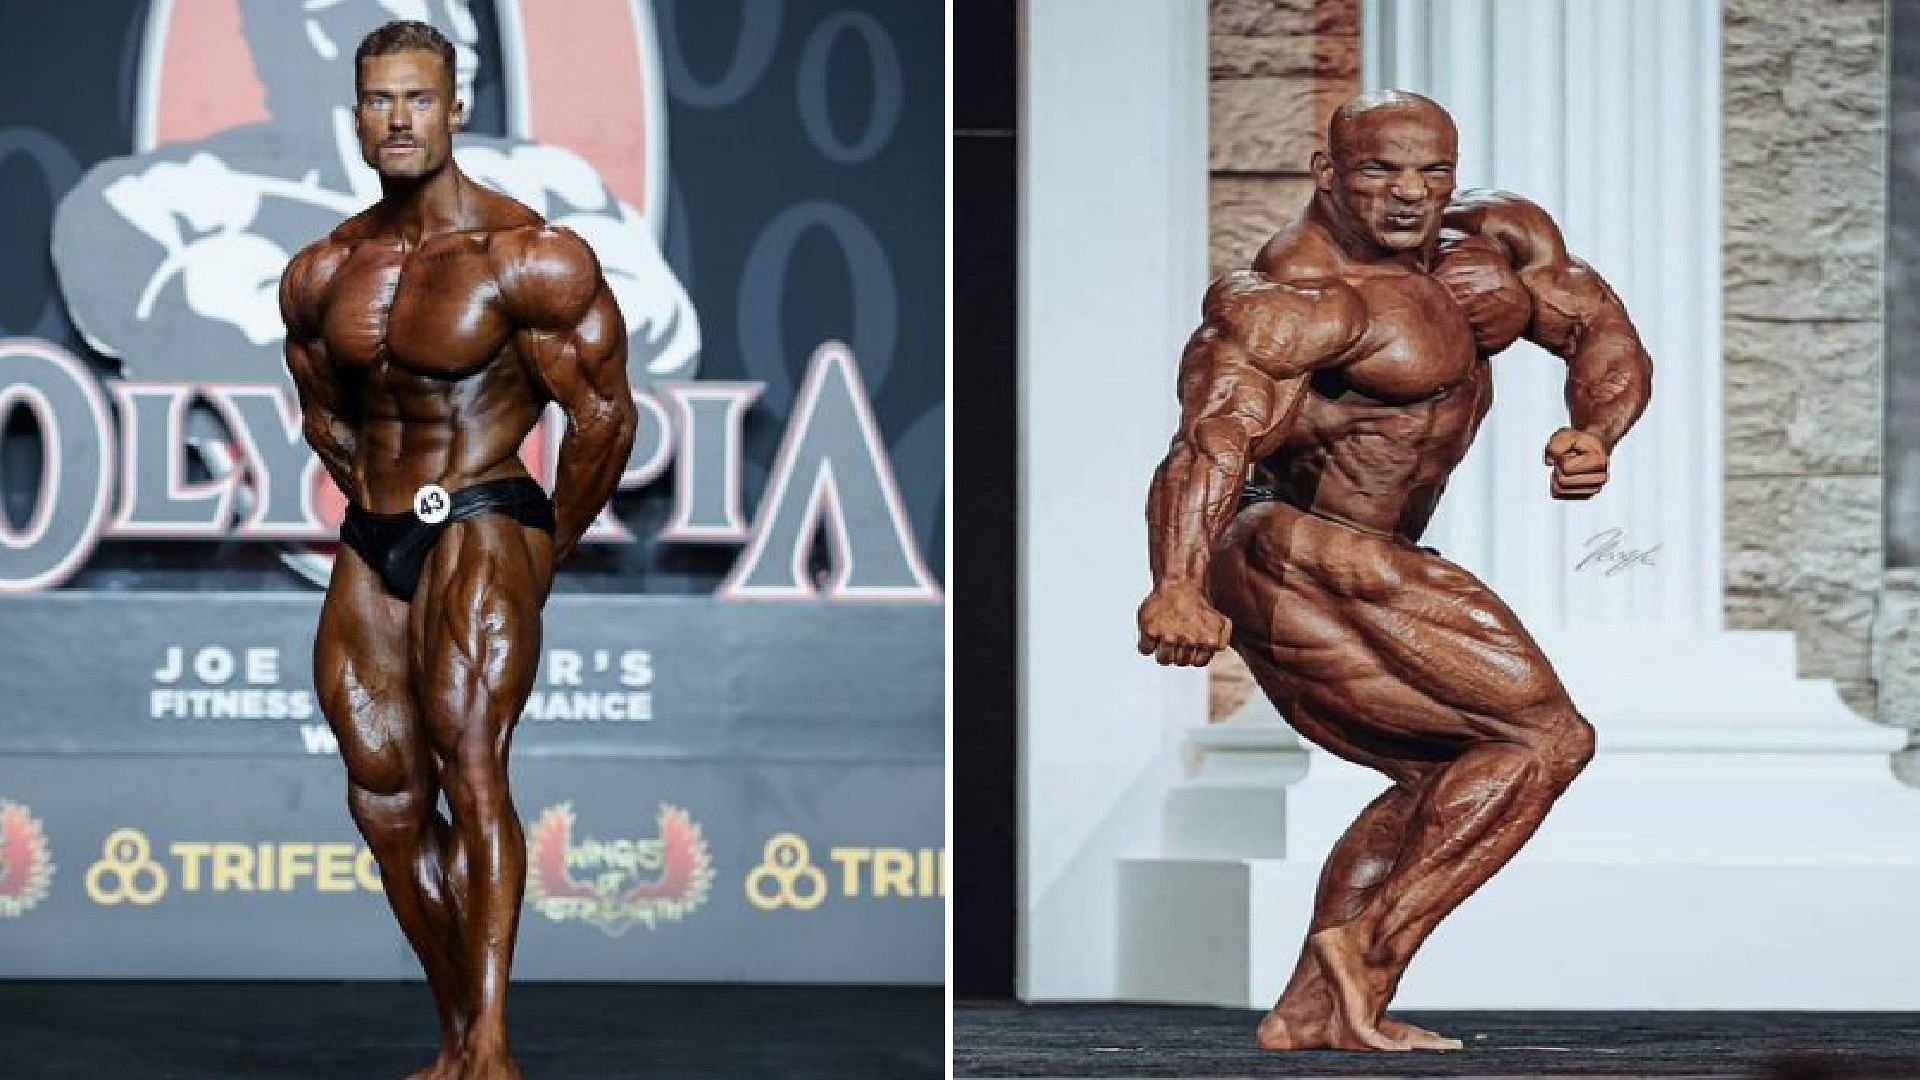 Classic Physique Olympia vs Mr Olympia: What is the difference?